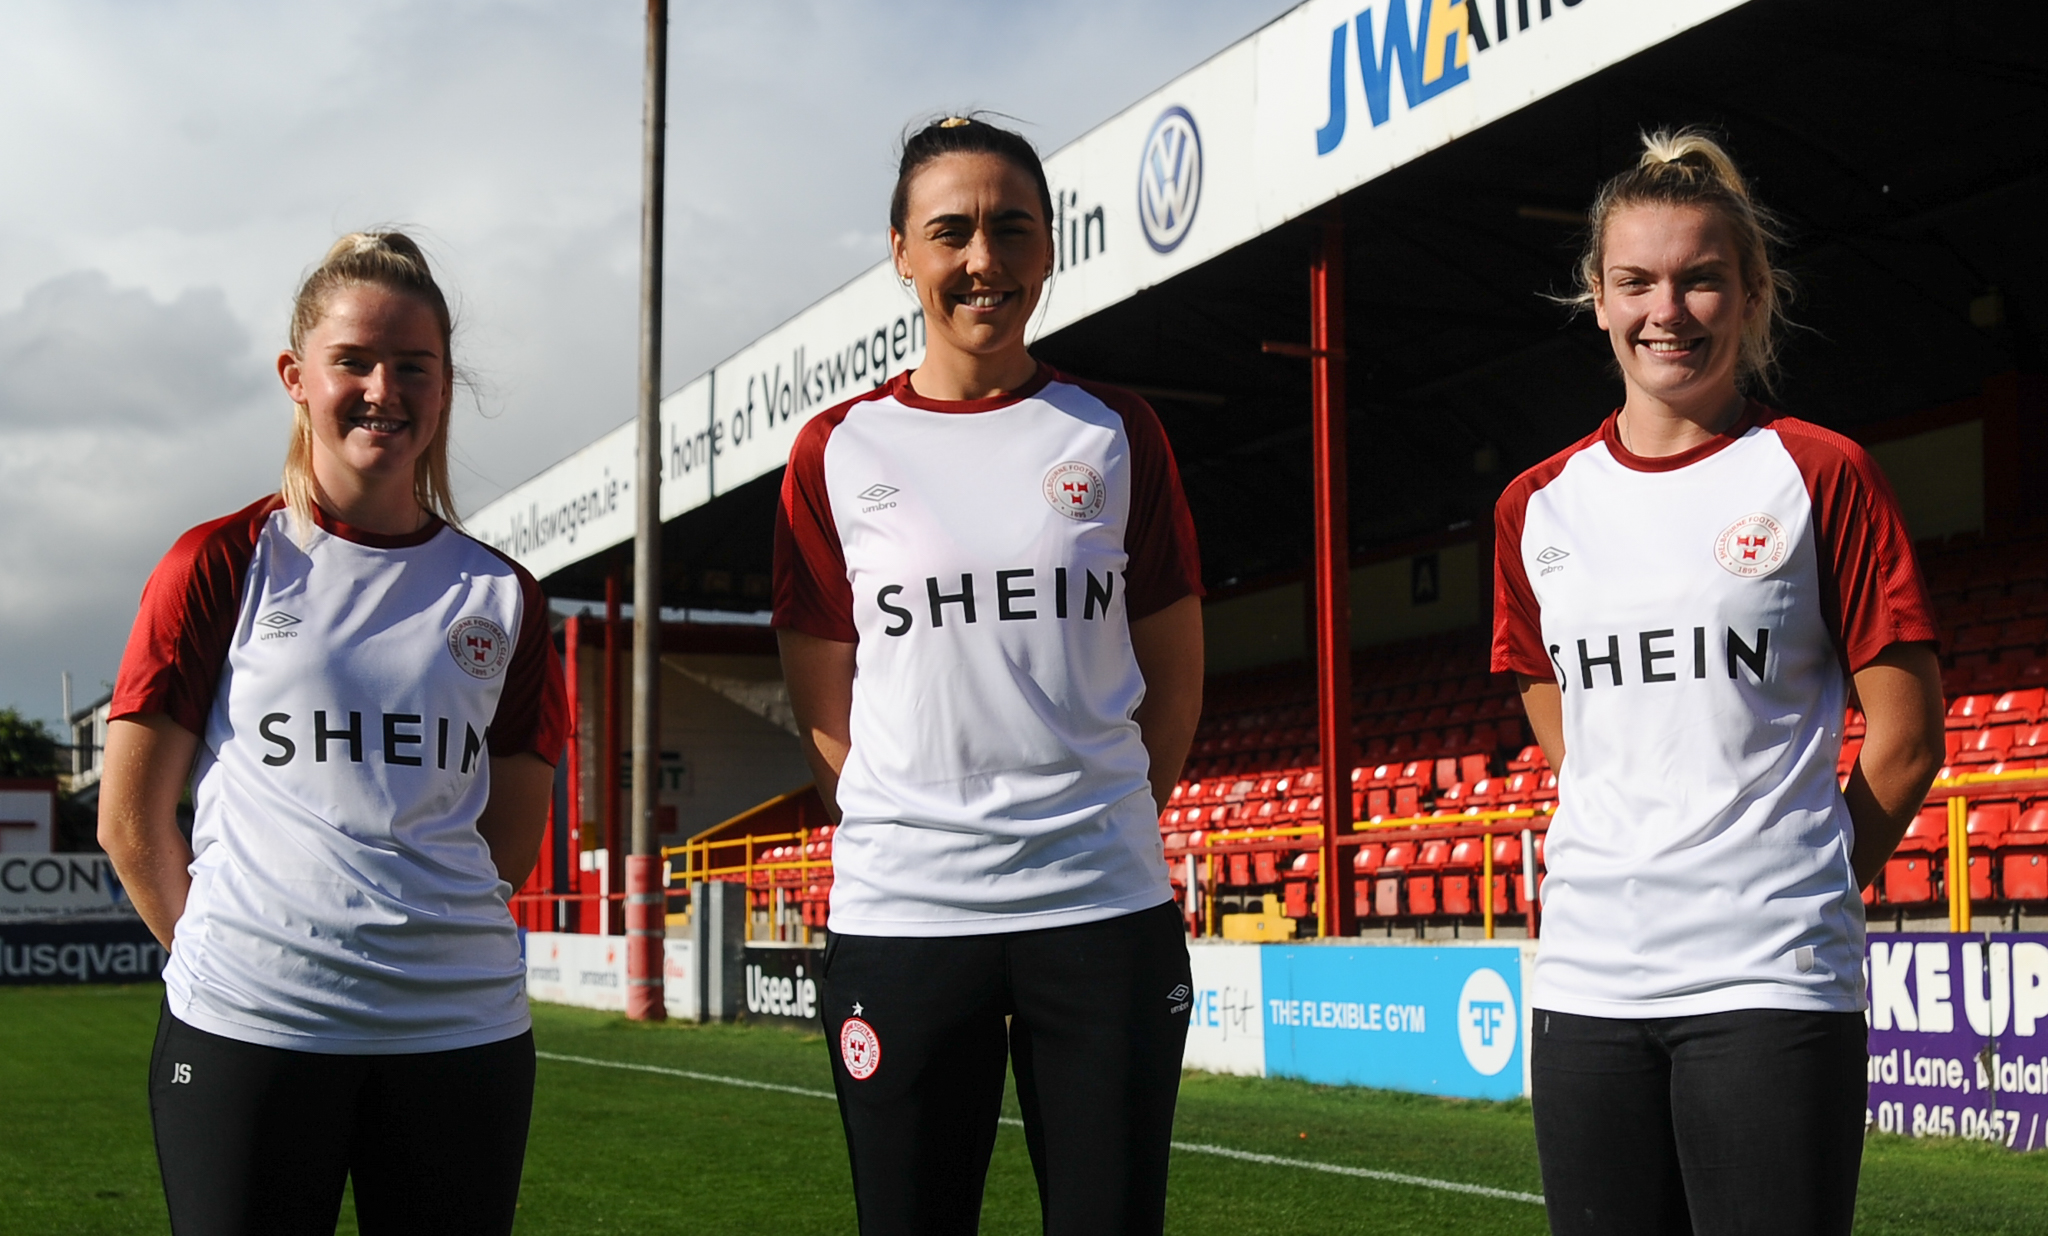 Shelbourne announces SHEIN as new Official Leisurewear and Womenswear partner for WNL team